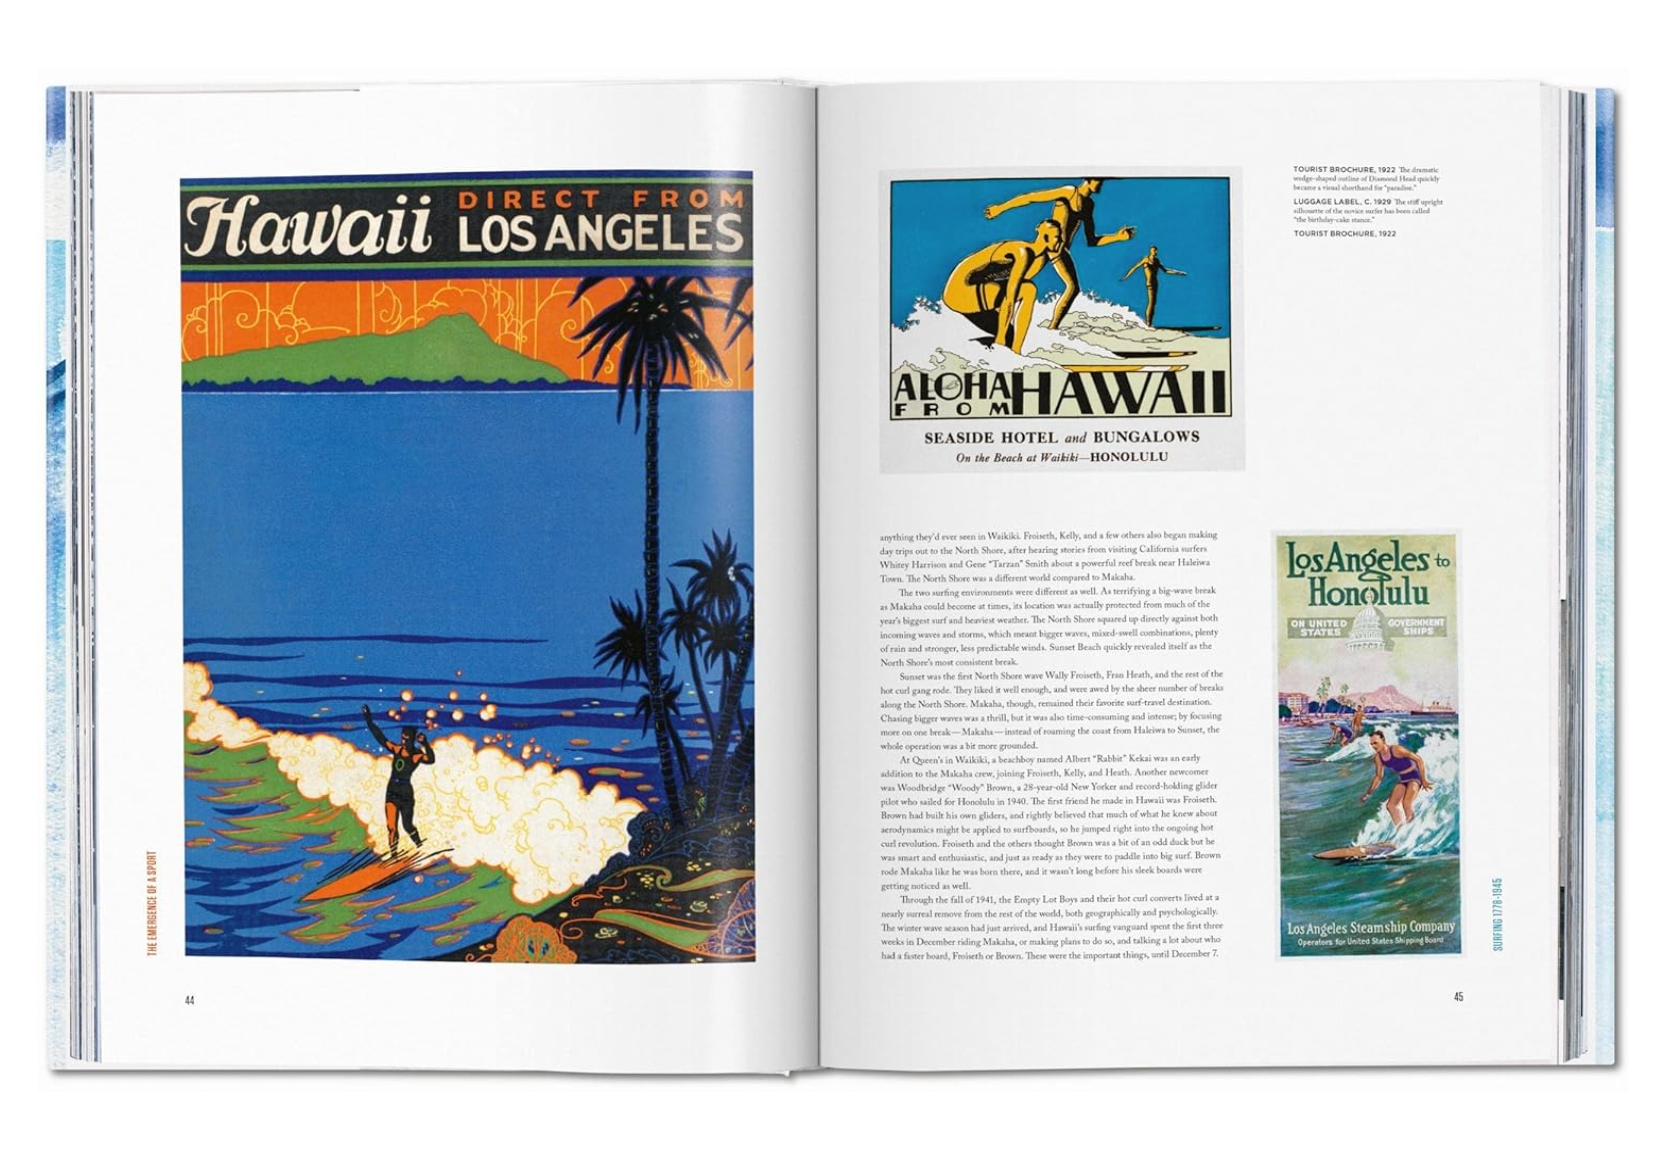 An open Breitling Book of Surfing displays a colorful vintage travel advertisement for flights from Los Angeles to Hawaii, featuring vibrant illustrations of seascapes, surfers, and bungalows.